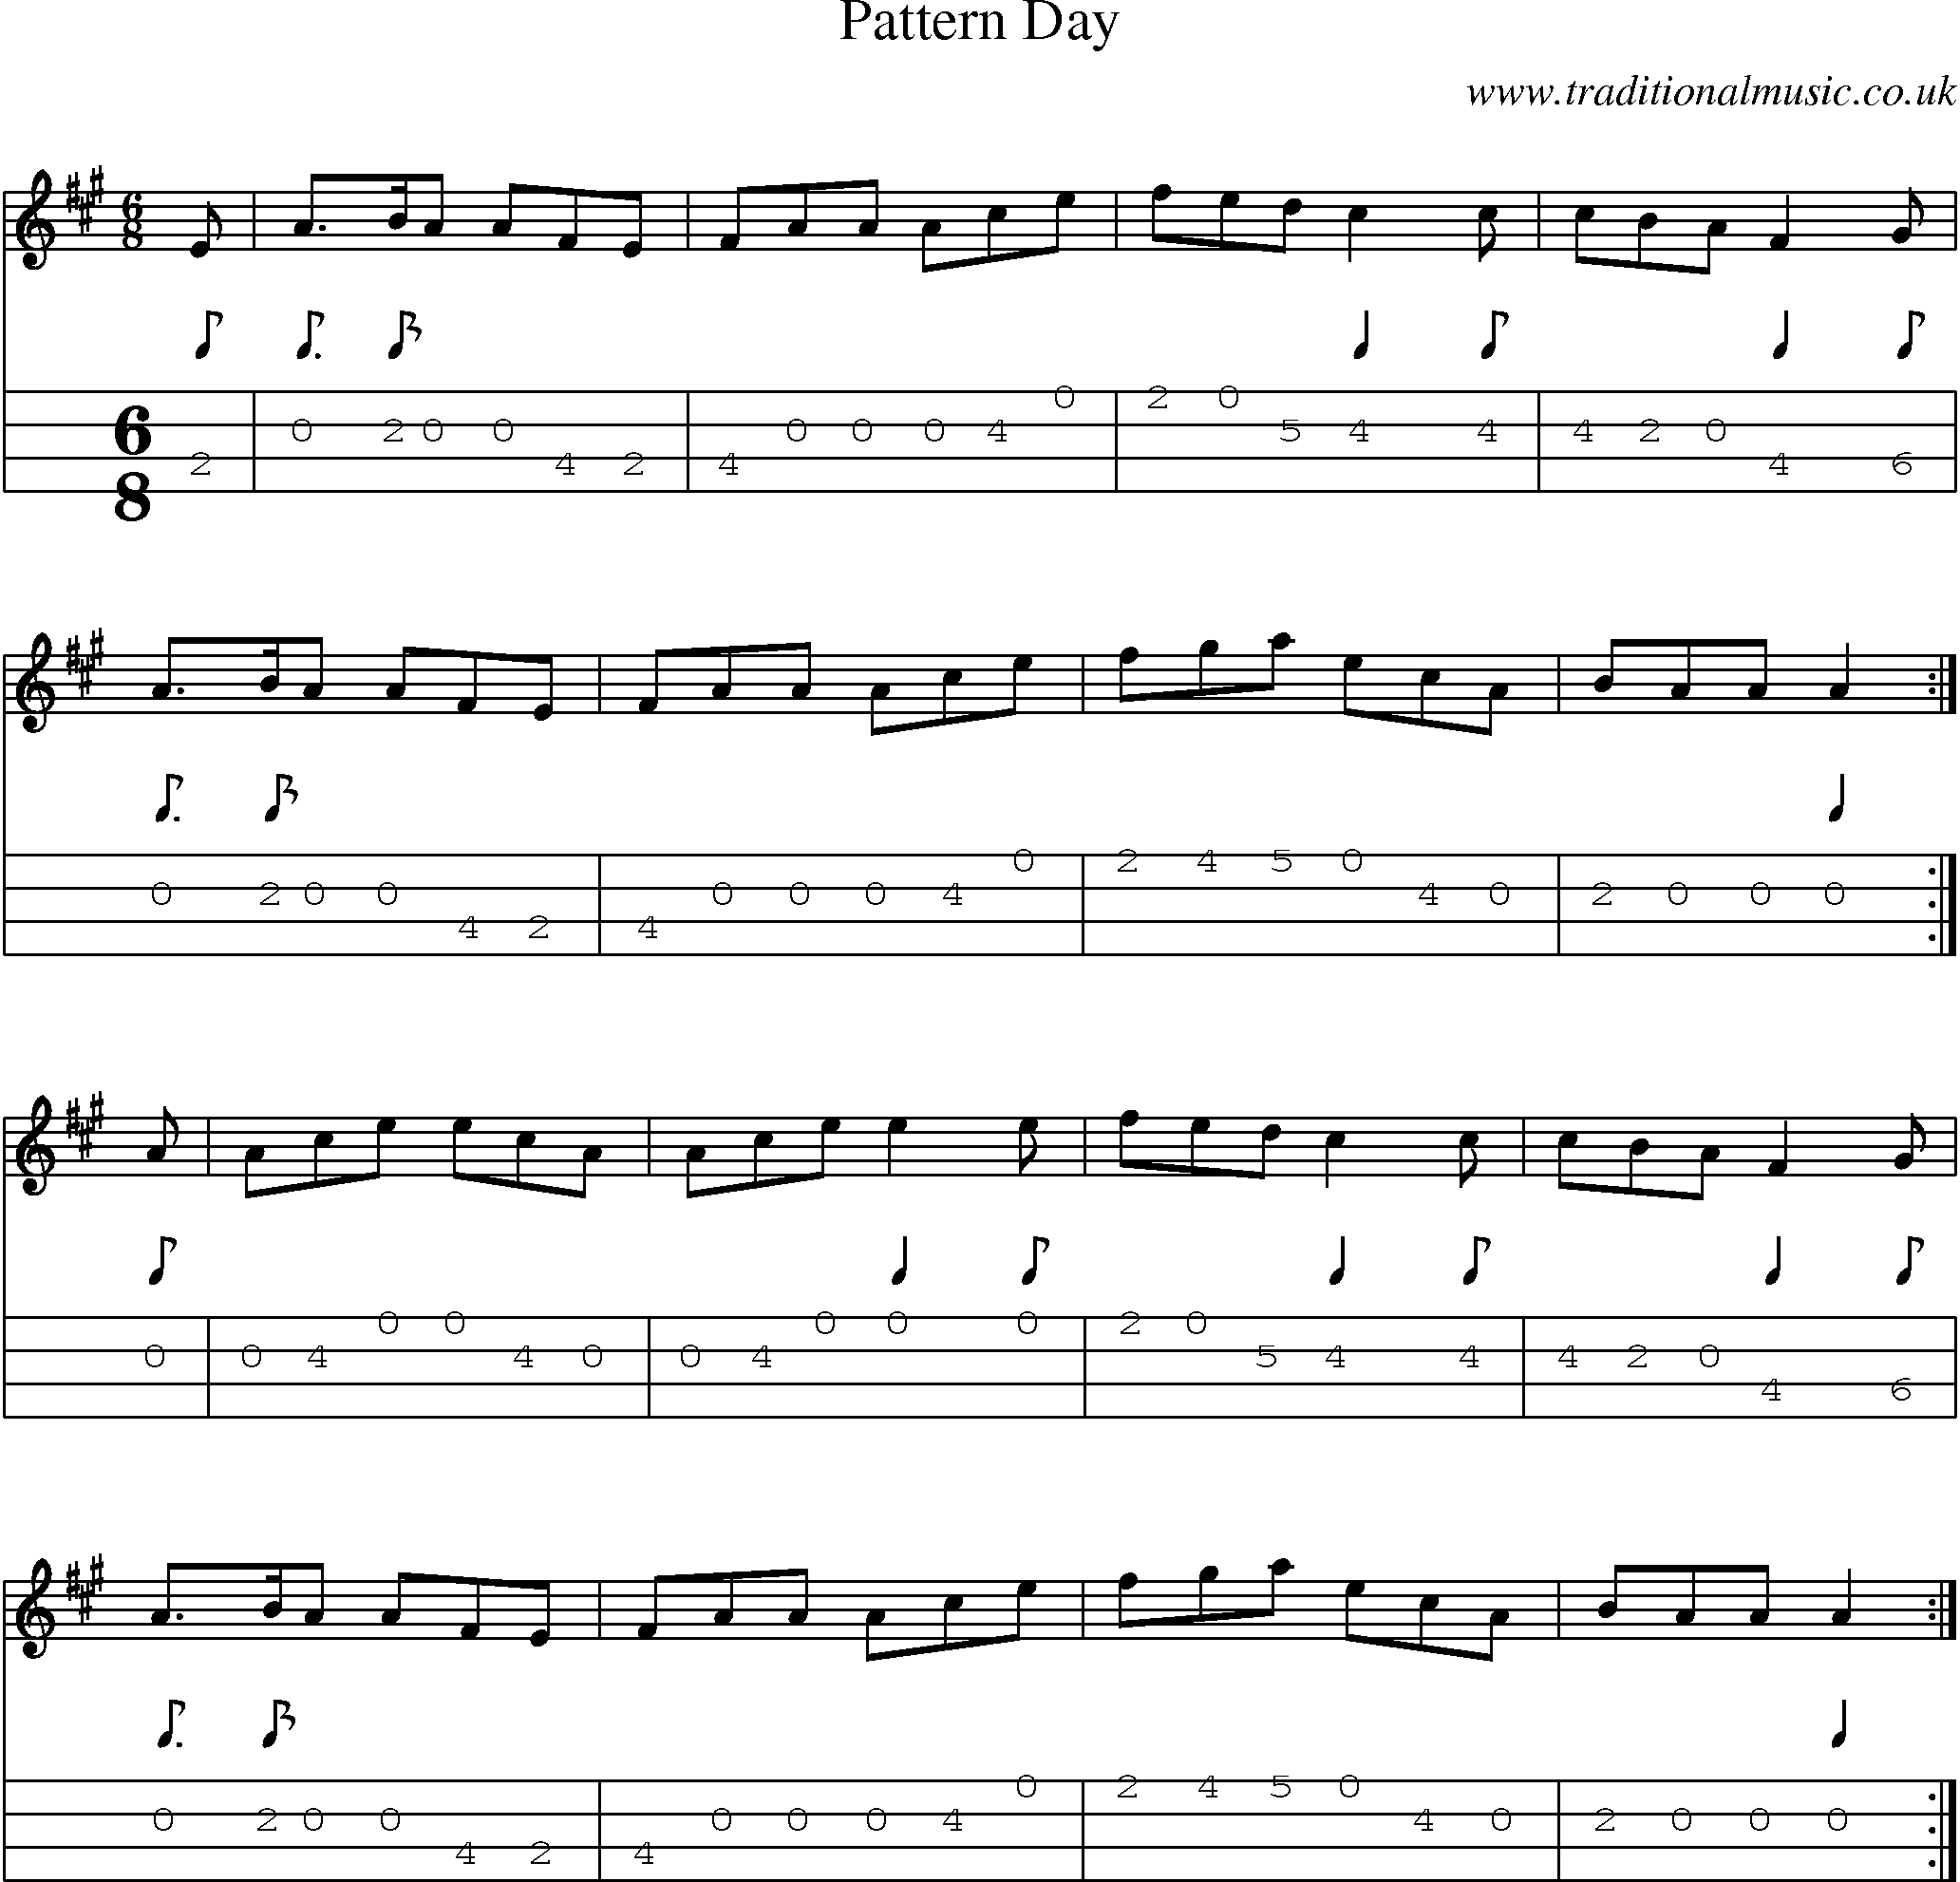 Music Score and Mandolin Tabs for Pattern Day